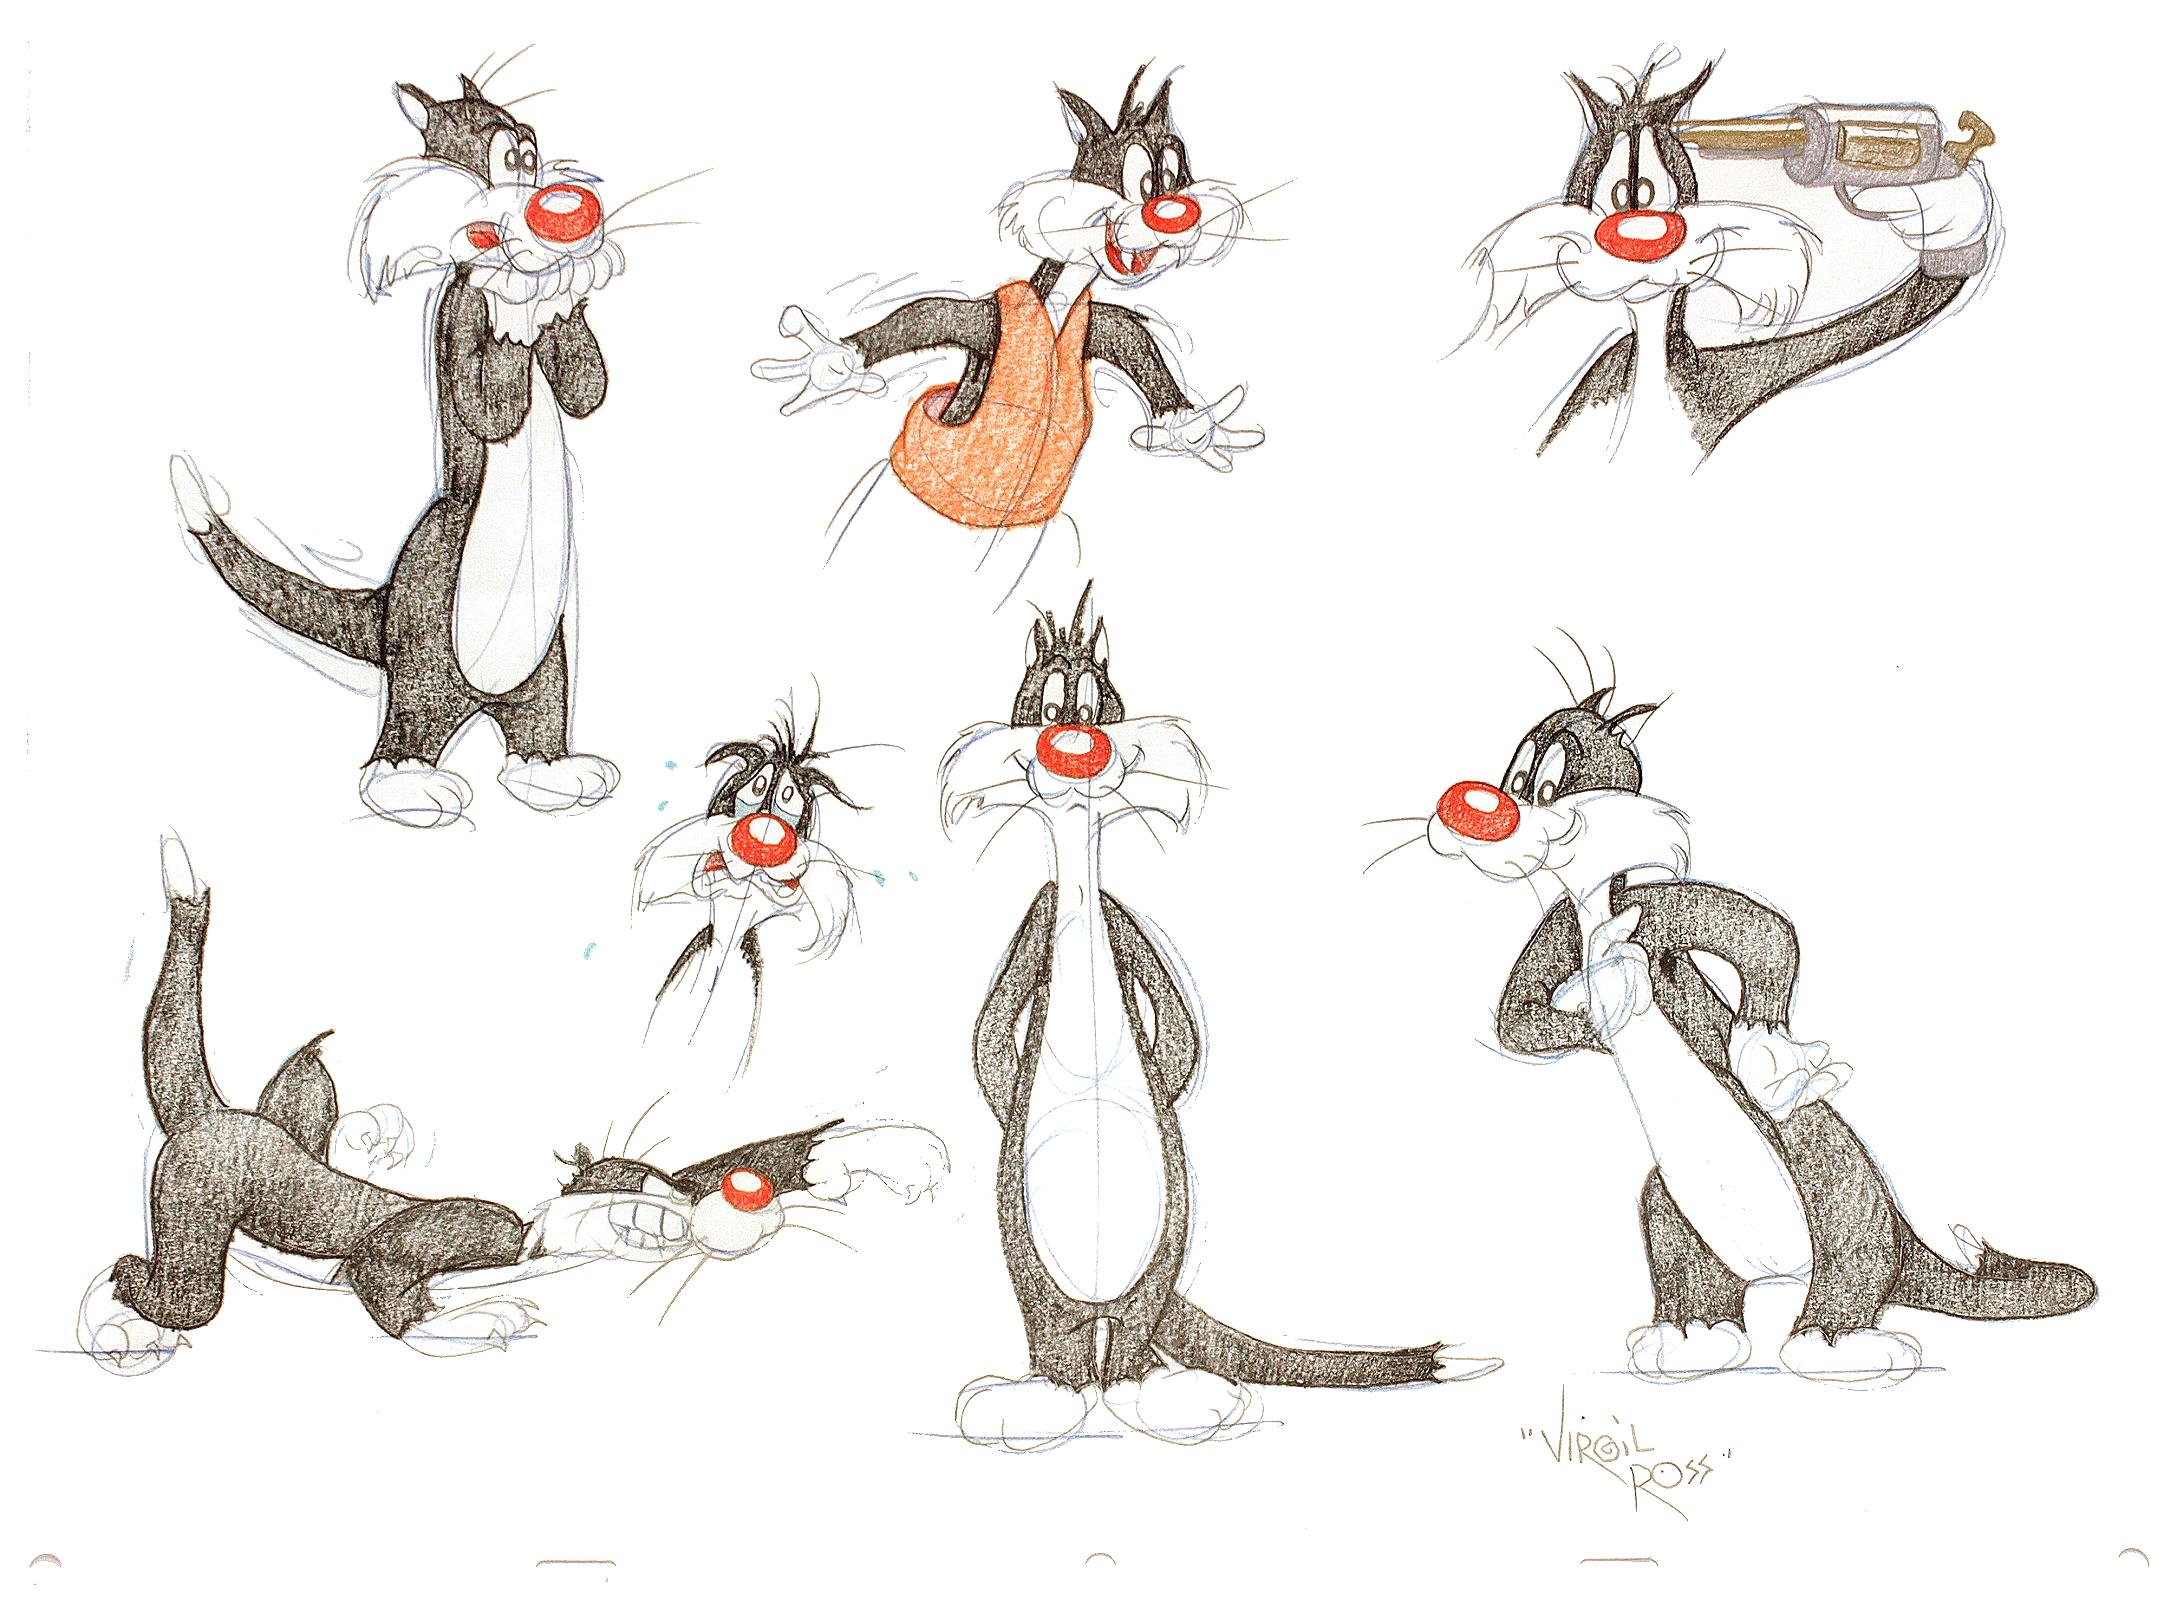 American SEVEN ORIGINAL DRAWINGS OF SILVESTER THE CAT - Signed By Virgil Ross For Sale